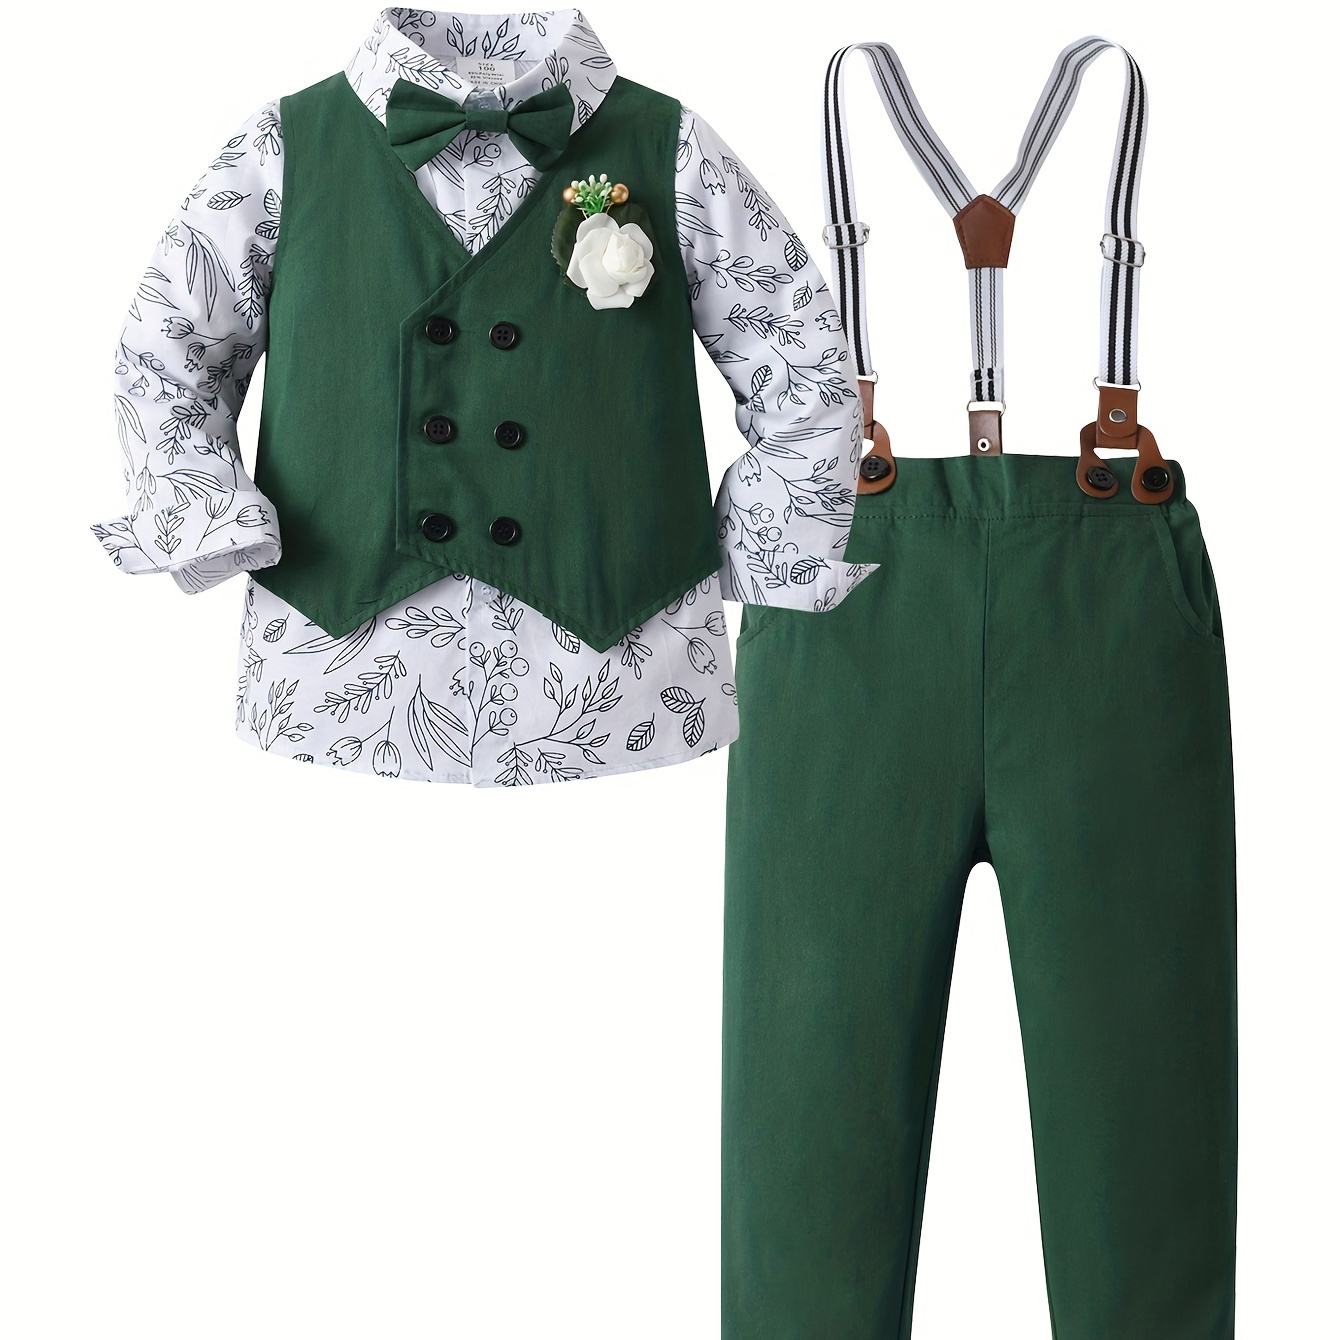 

3ocs Boys Formal Gentleman Outfits, Long Sleeve Leaves Print Bowtie Shirt & Suspender Pants & Vest, Kids Clothing Set For Competition Performance Wedding Banquet Dress